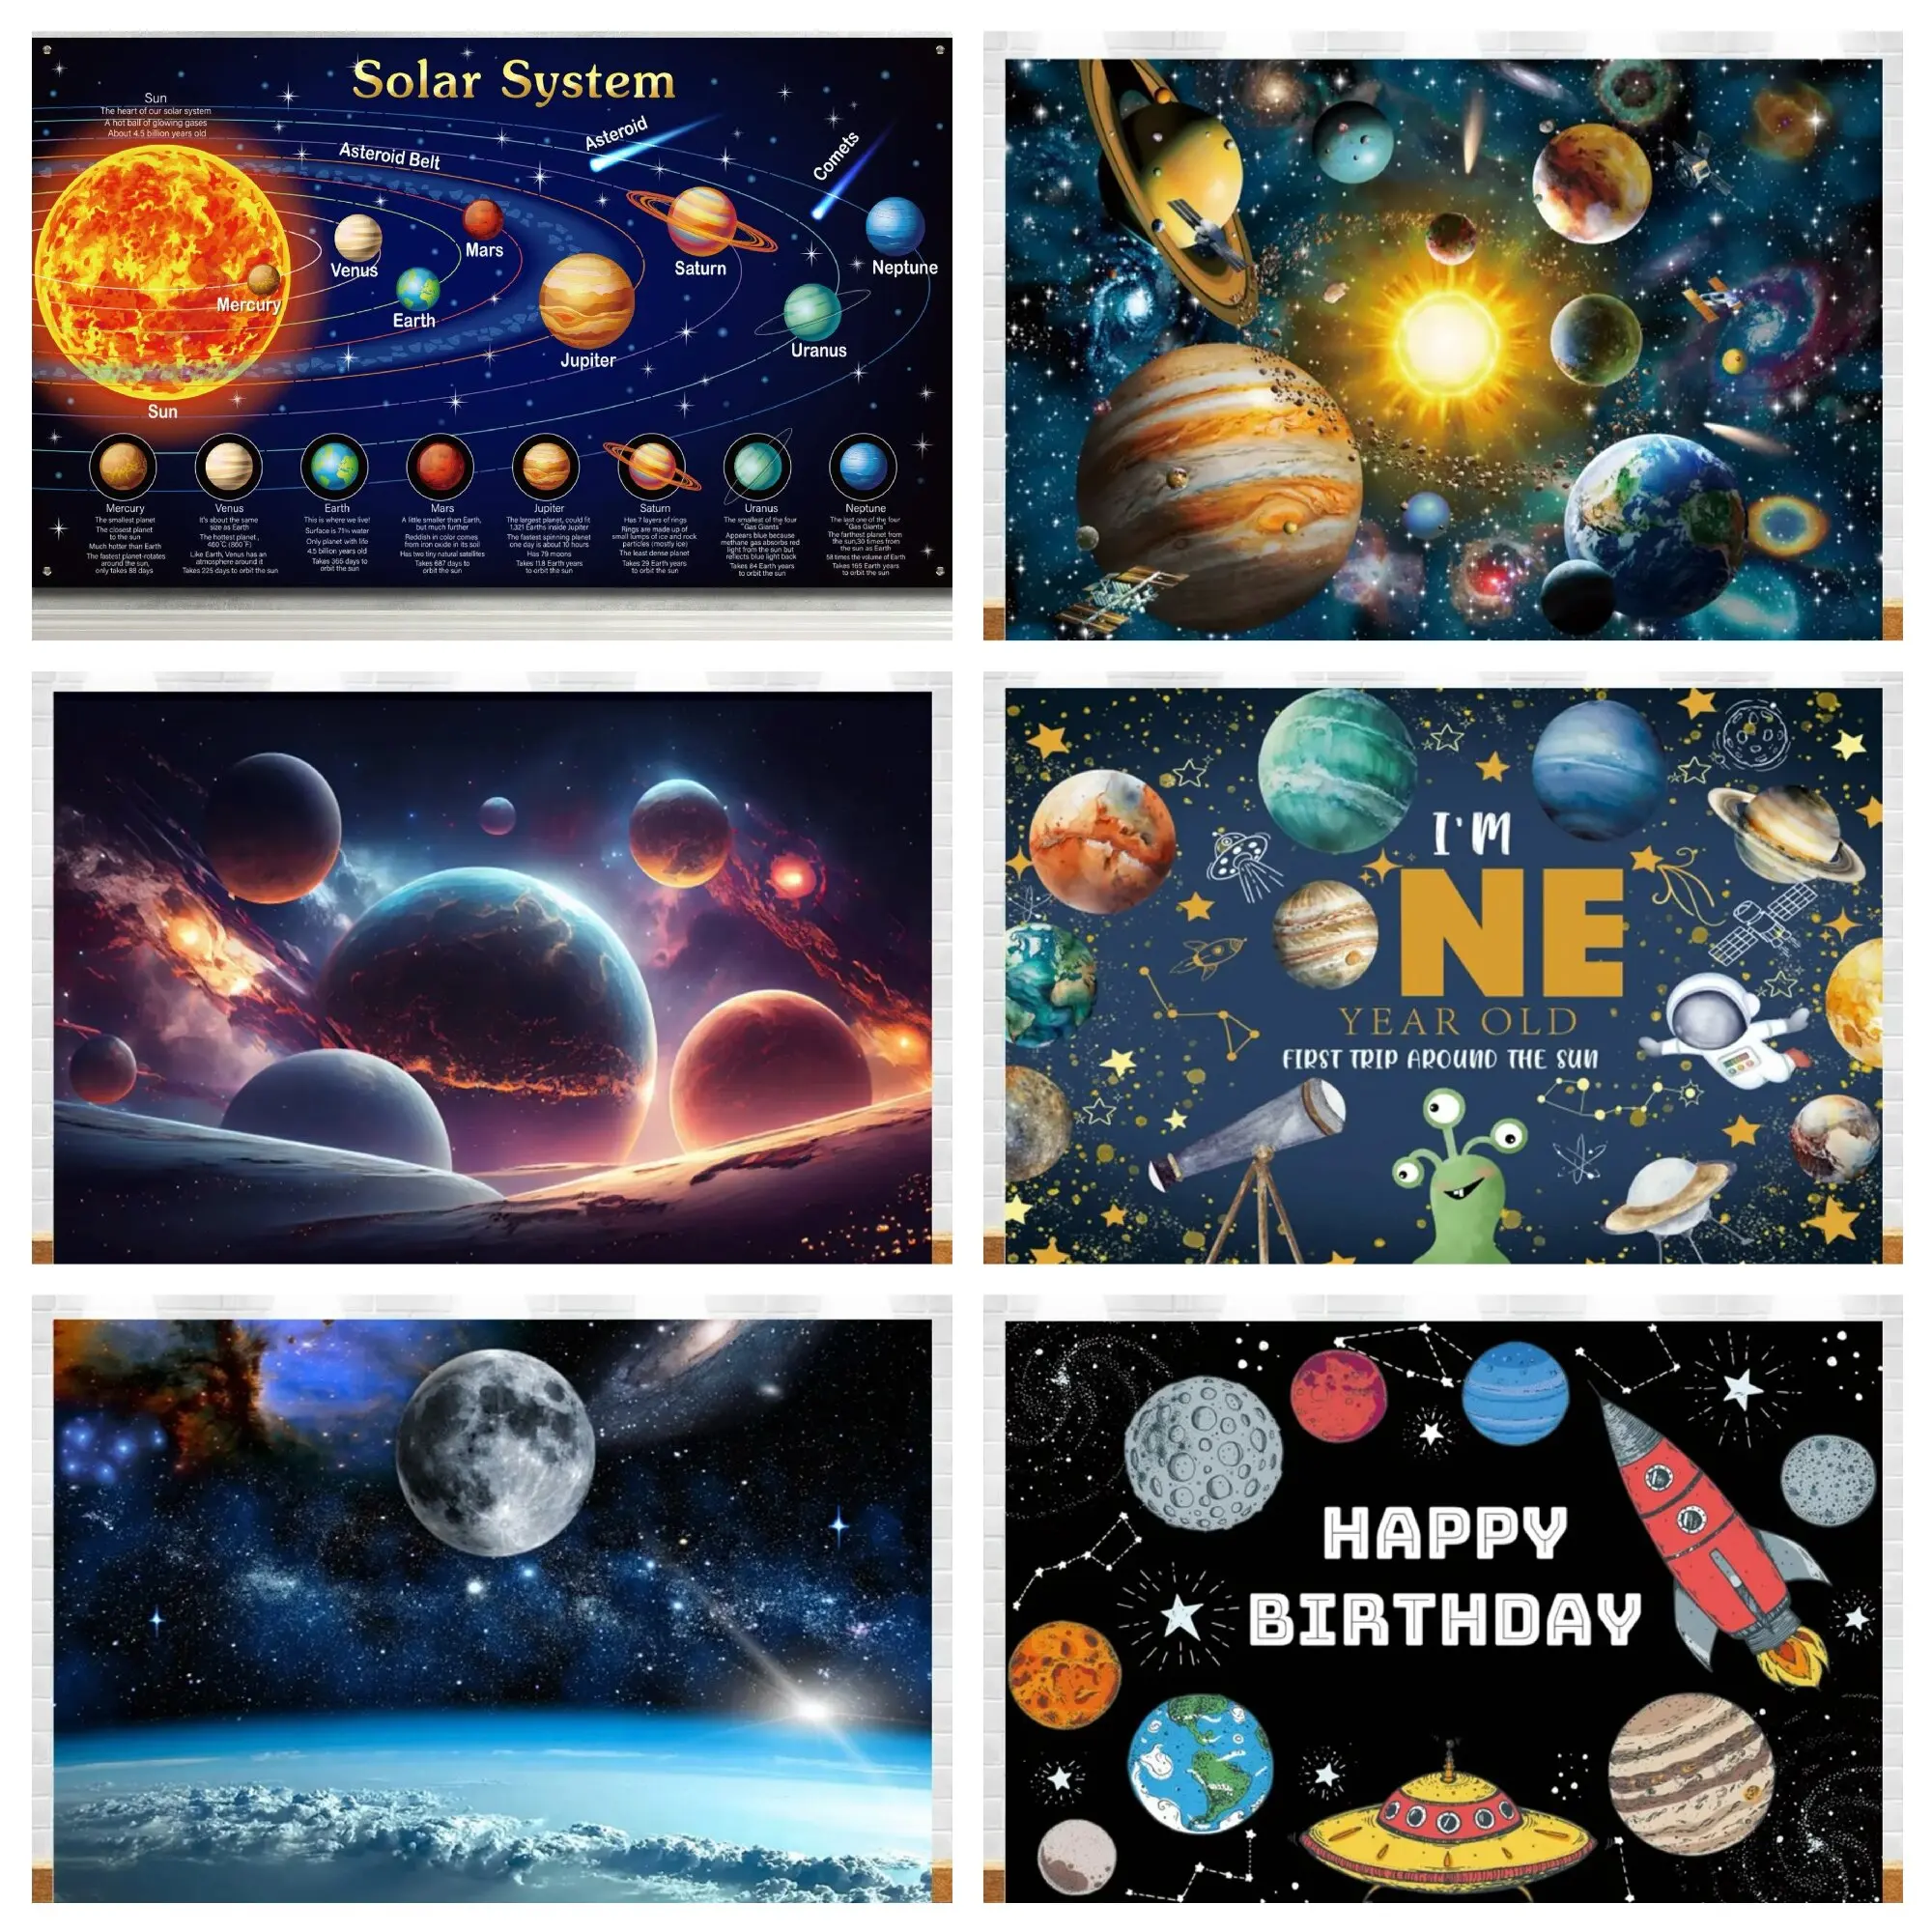 

Outer Space Happy Birthday Backdrop Universe Planet Galaxy Spacecraft Astronaut Blast Off Rocket Baby Shower Photo Background